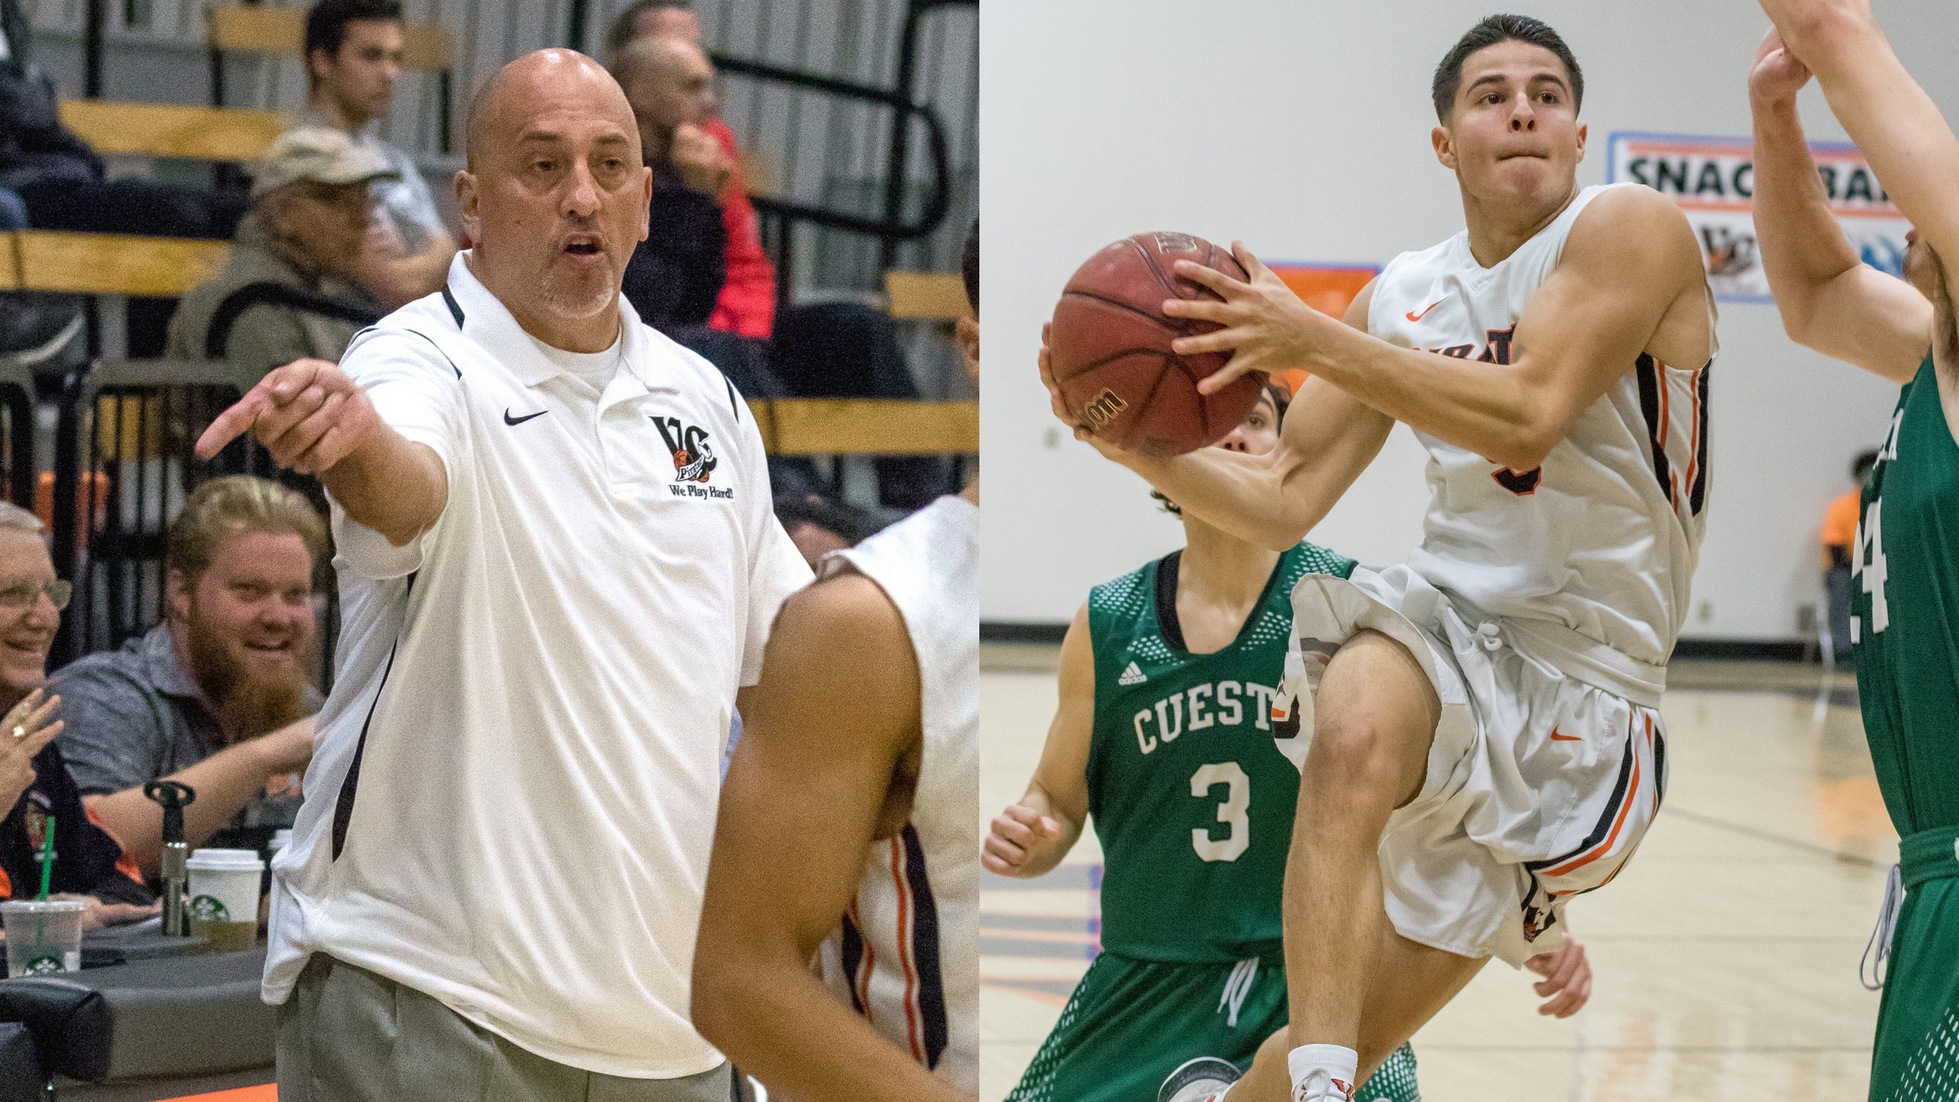 Joey Ramirez (left) and Jacob Alonzo (right) were named the Coach and Player of the Year in the WSC North. Photos Courtesy of Ventura College.